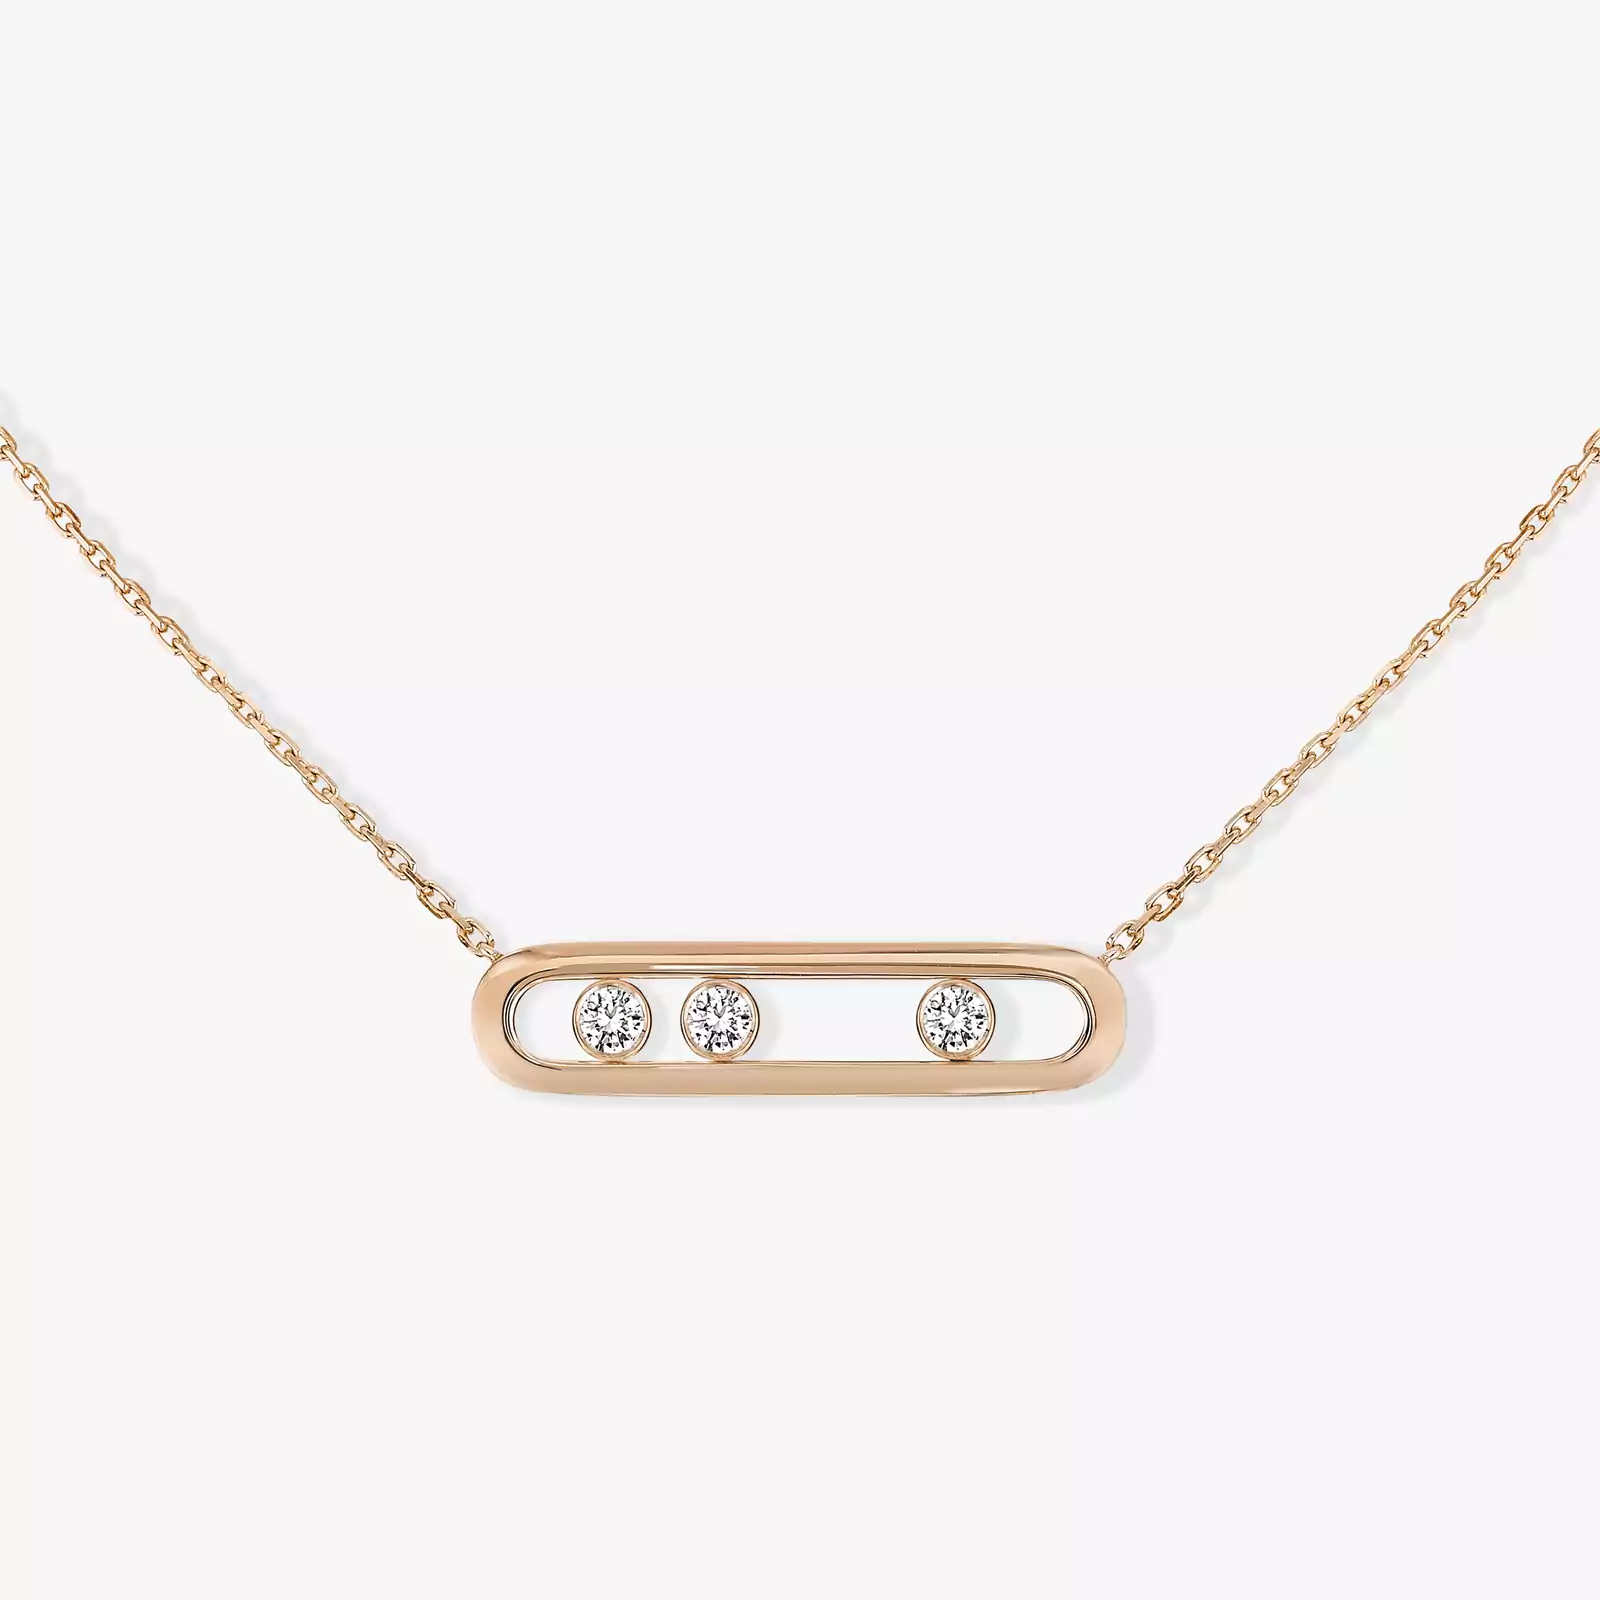 Necklace For Her Pink Gold Diamond Move 03997-PG